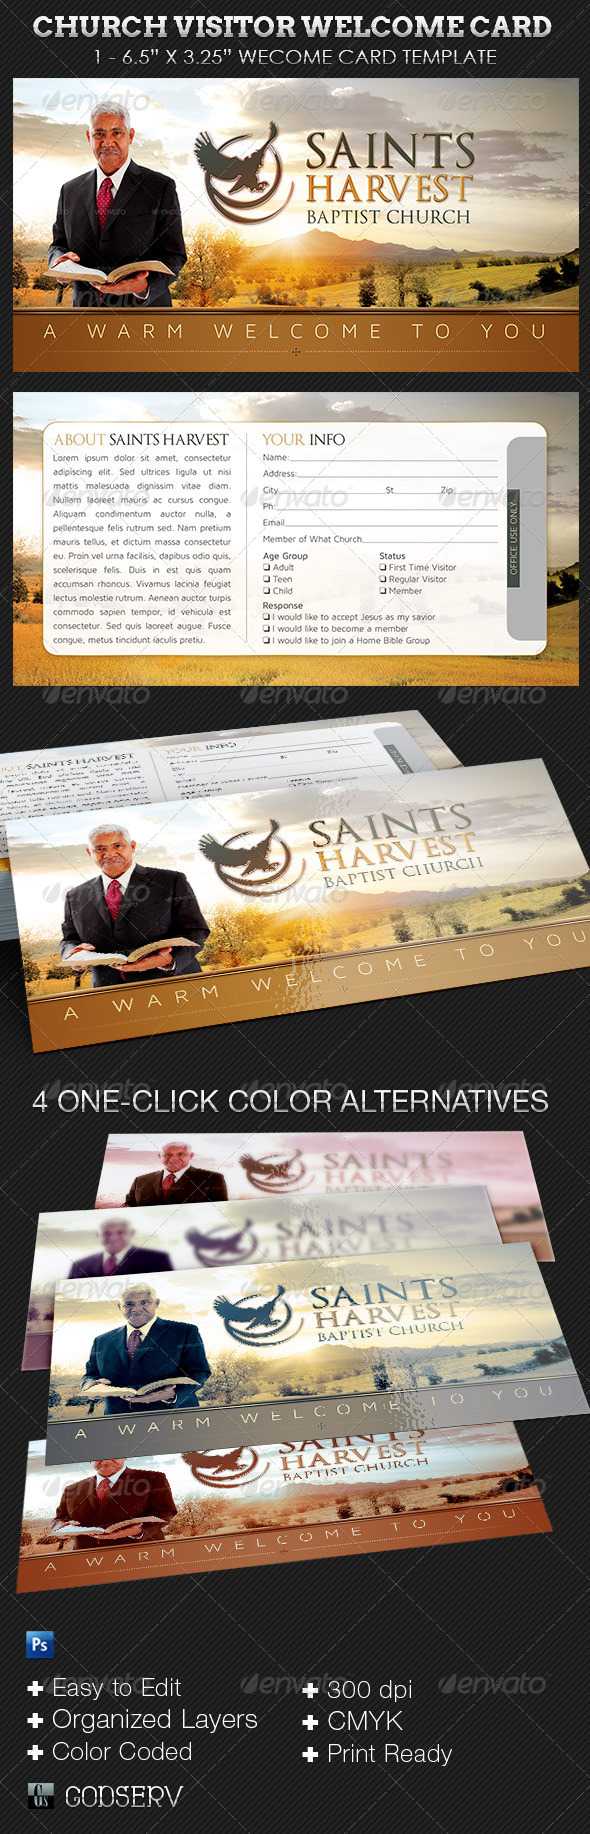 Church Visitor Welcome Card Template On Behance Within Church Visitor Card Template